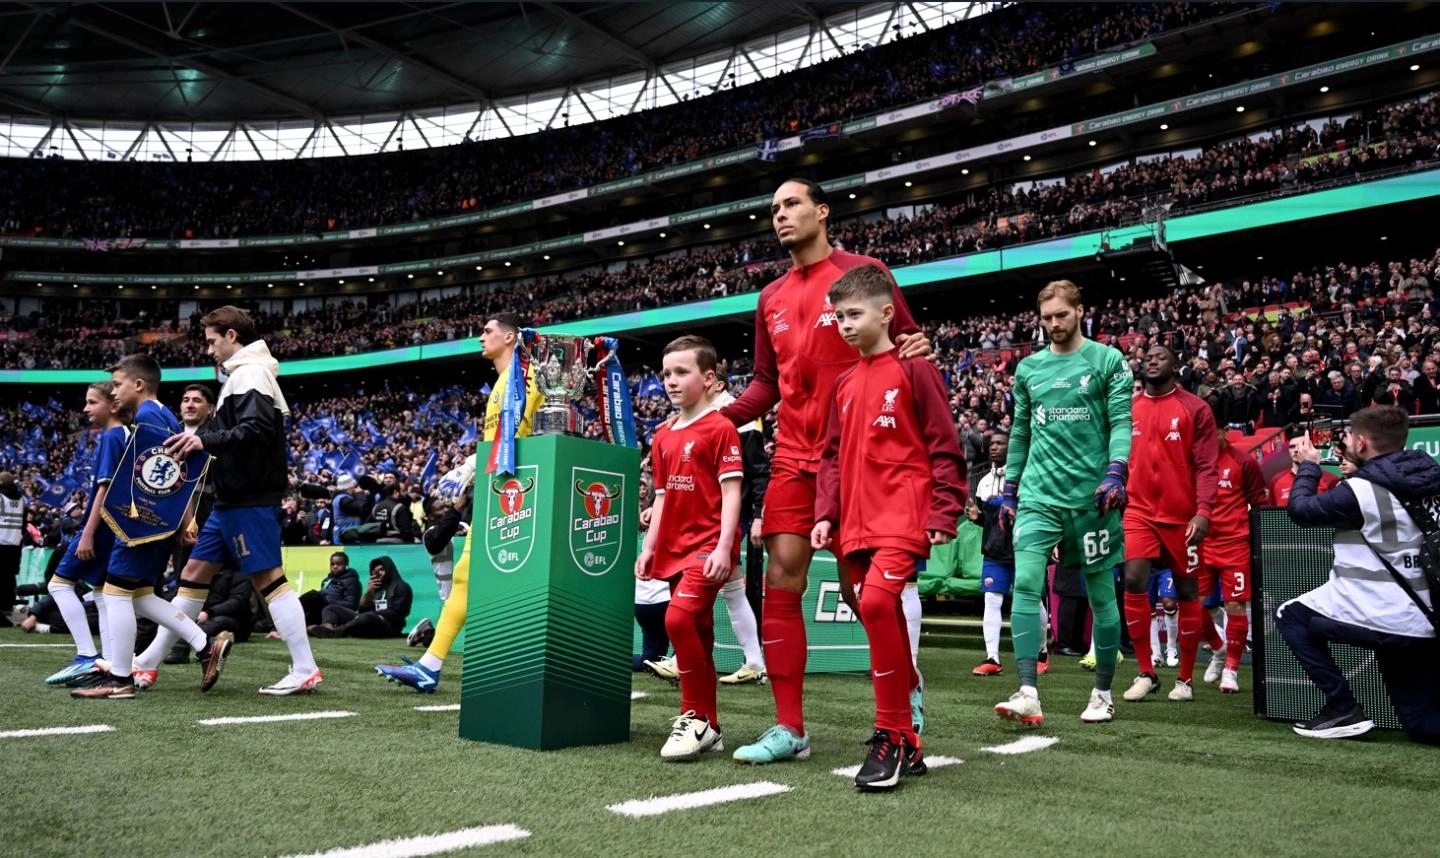 Meet our Carabao Cup Mascot